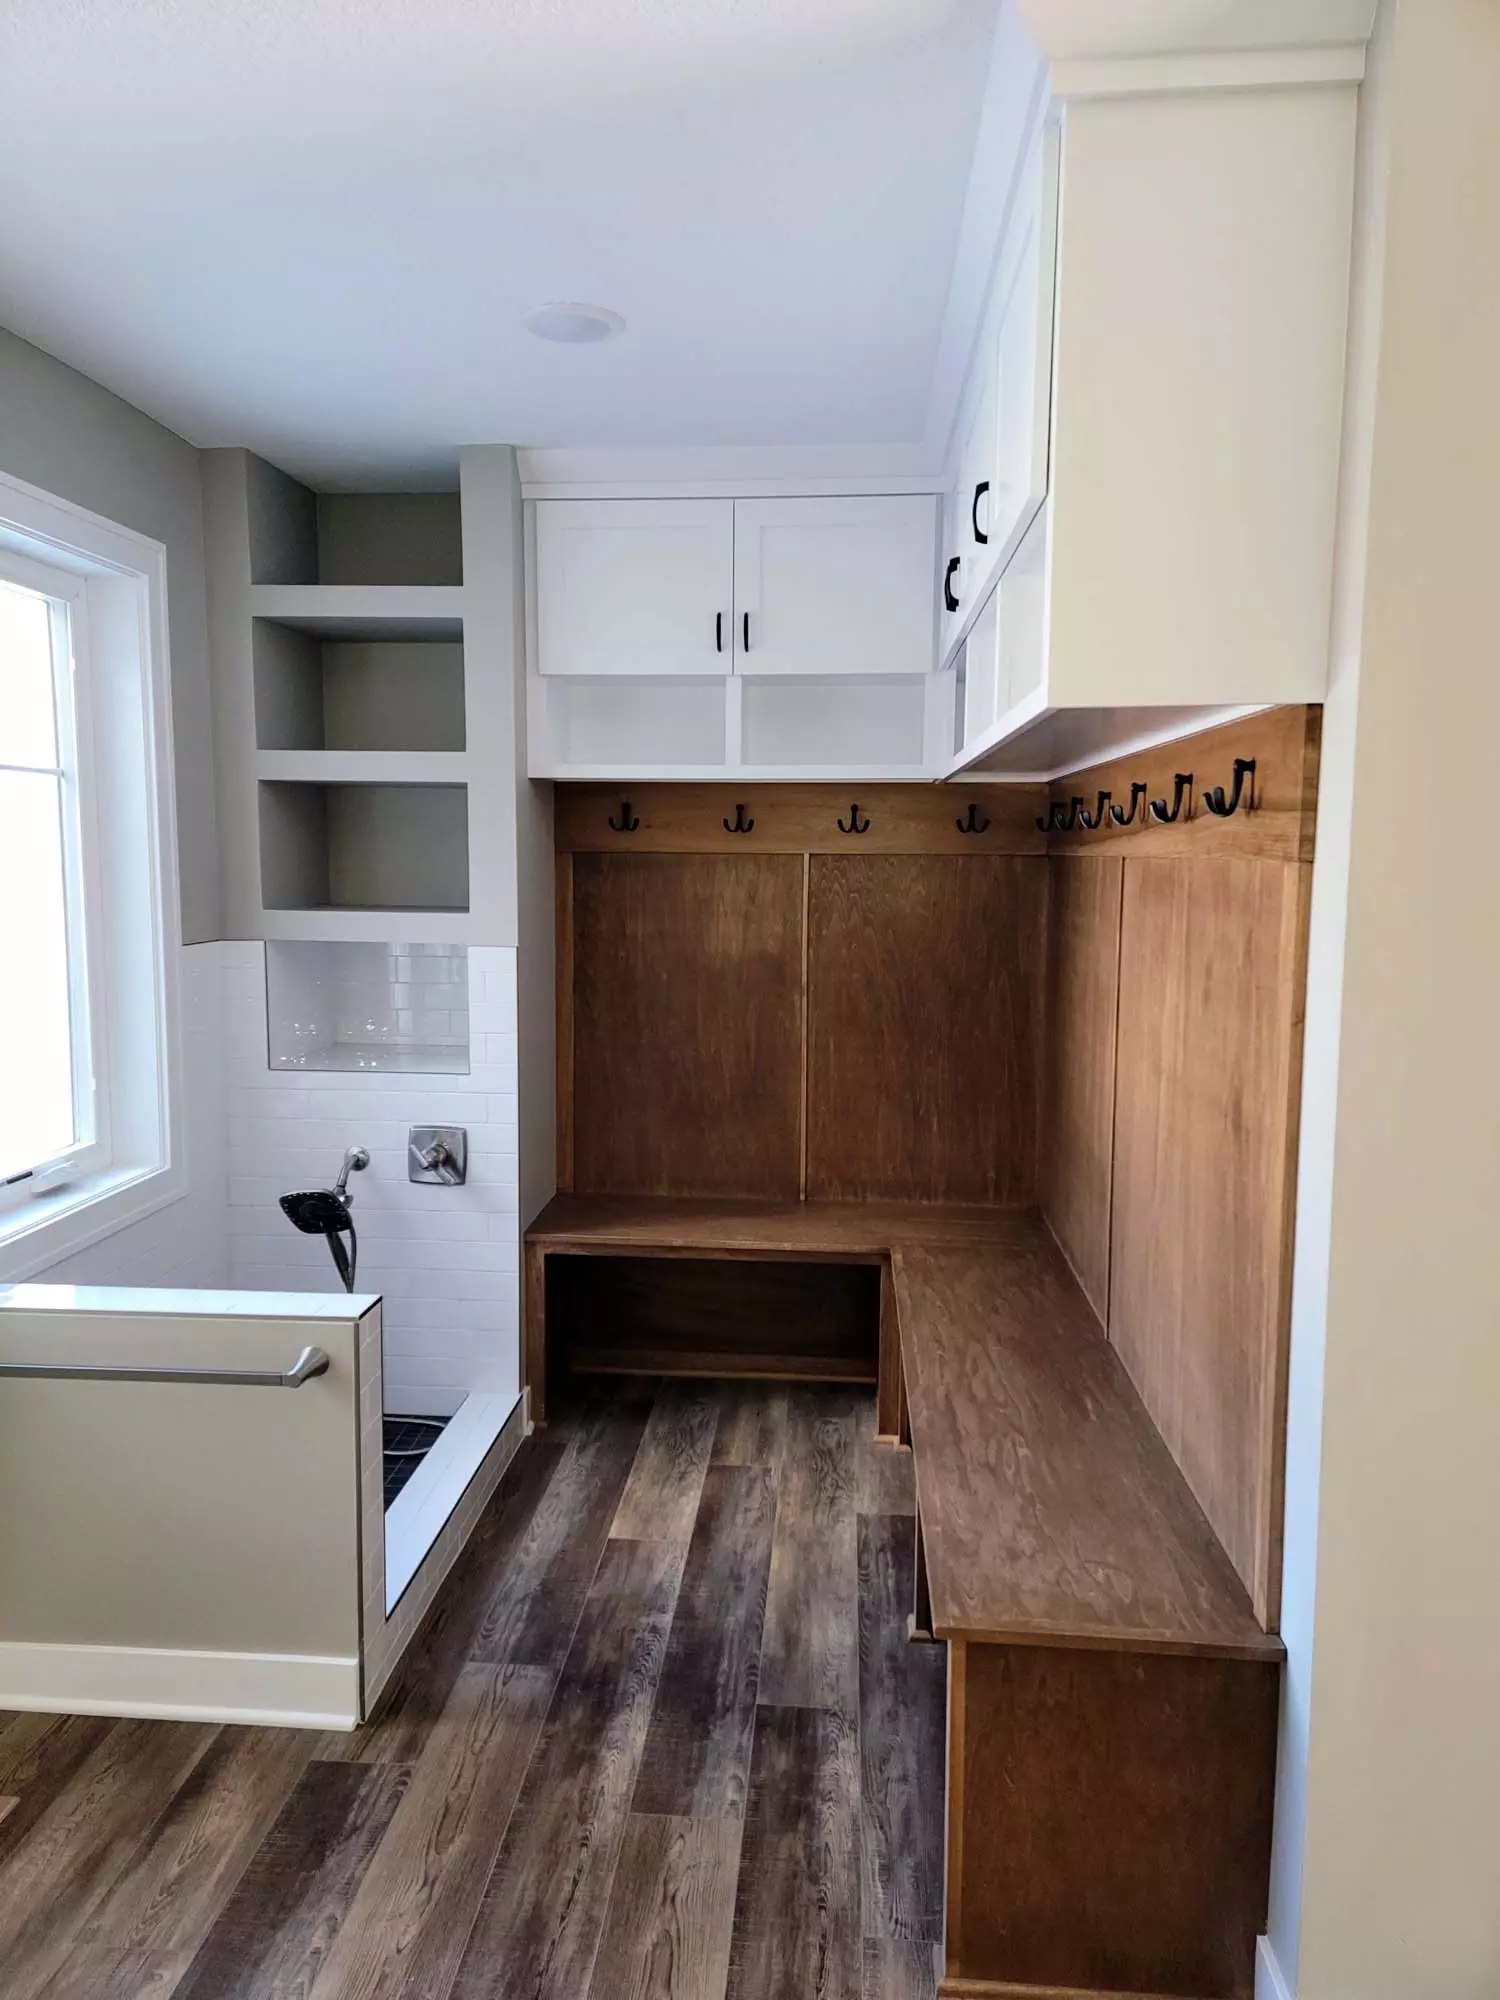 Mudroom w/ all kinds of storage